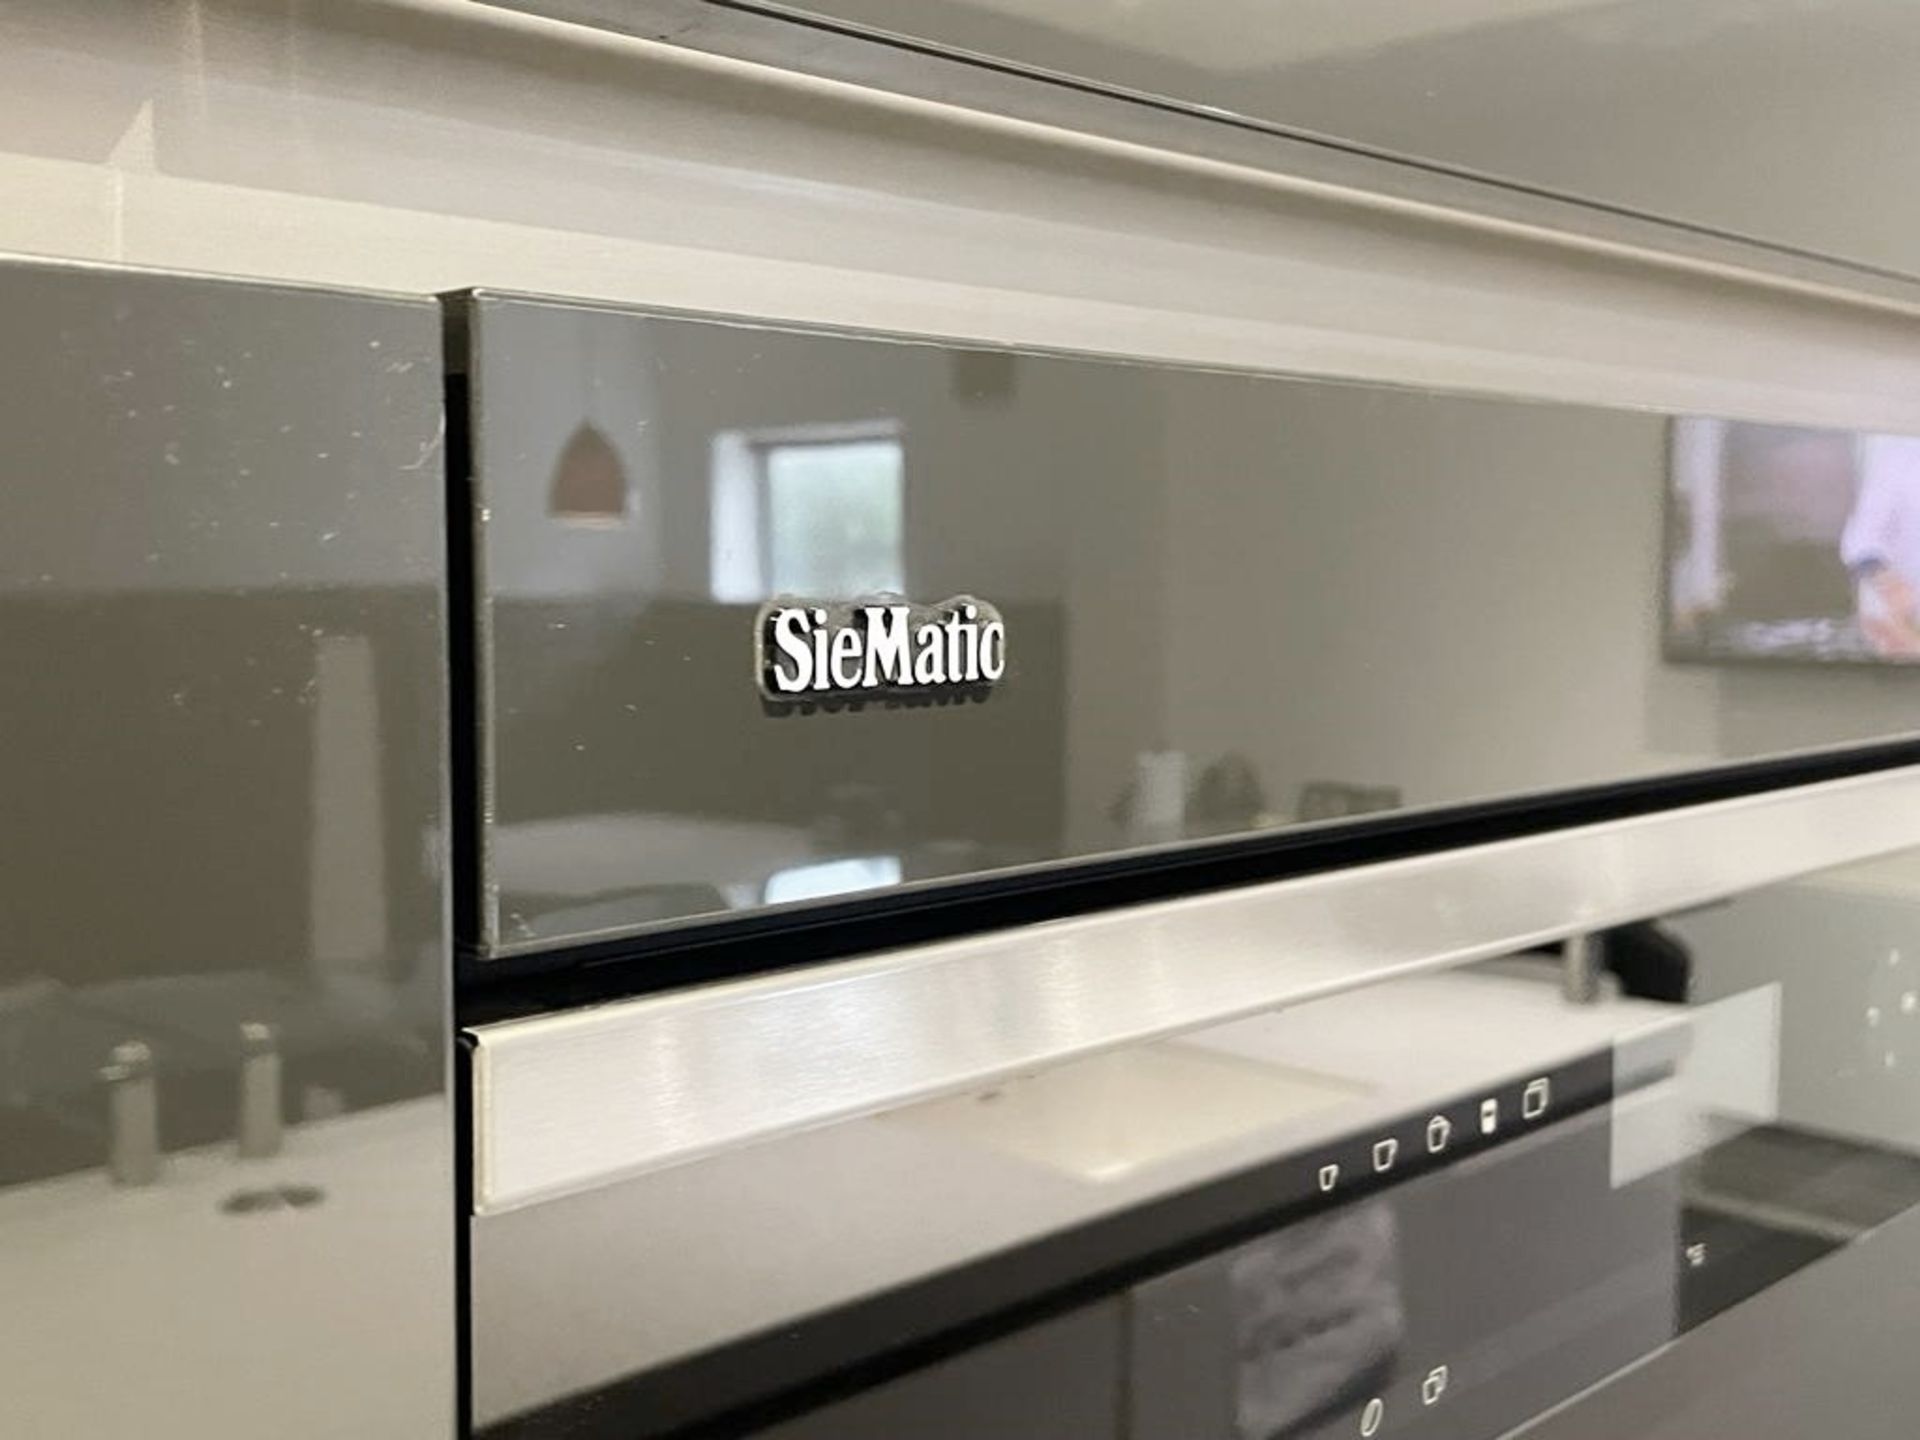 1 x SIEMATIC Bespoke Handleless Gloss Fitted Kitchen with 3.6m Island, Appliances & Granite Worktops - Image 51 of 117